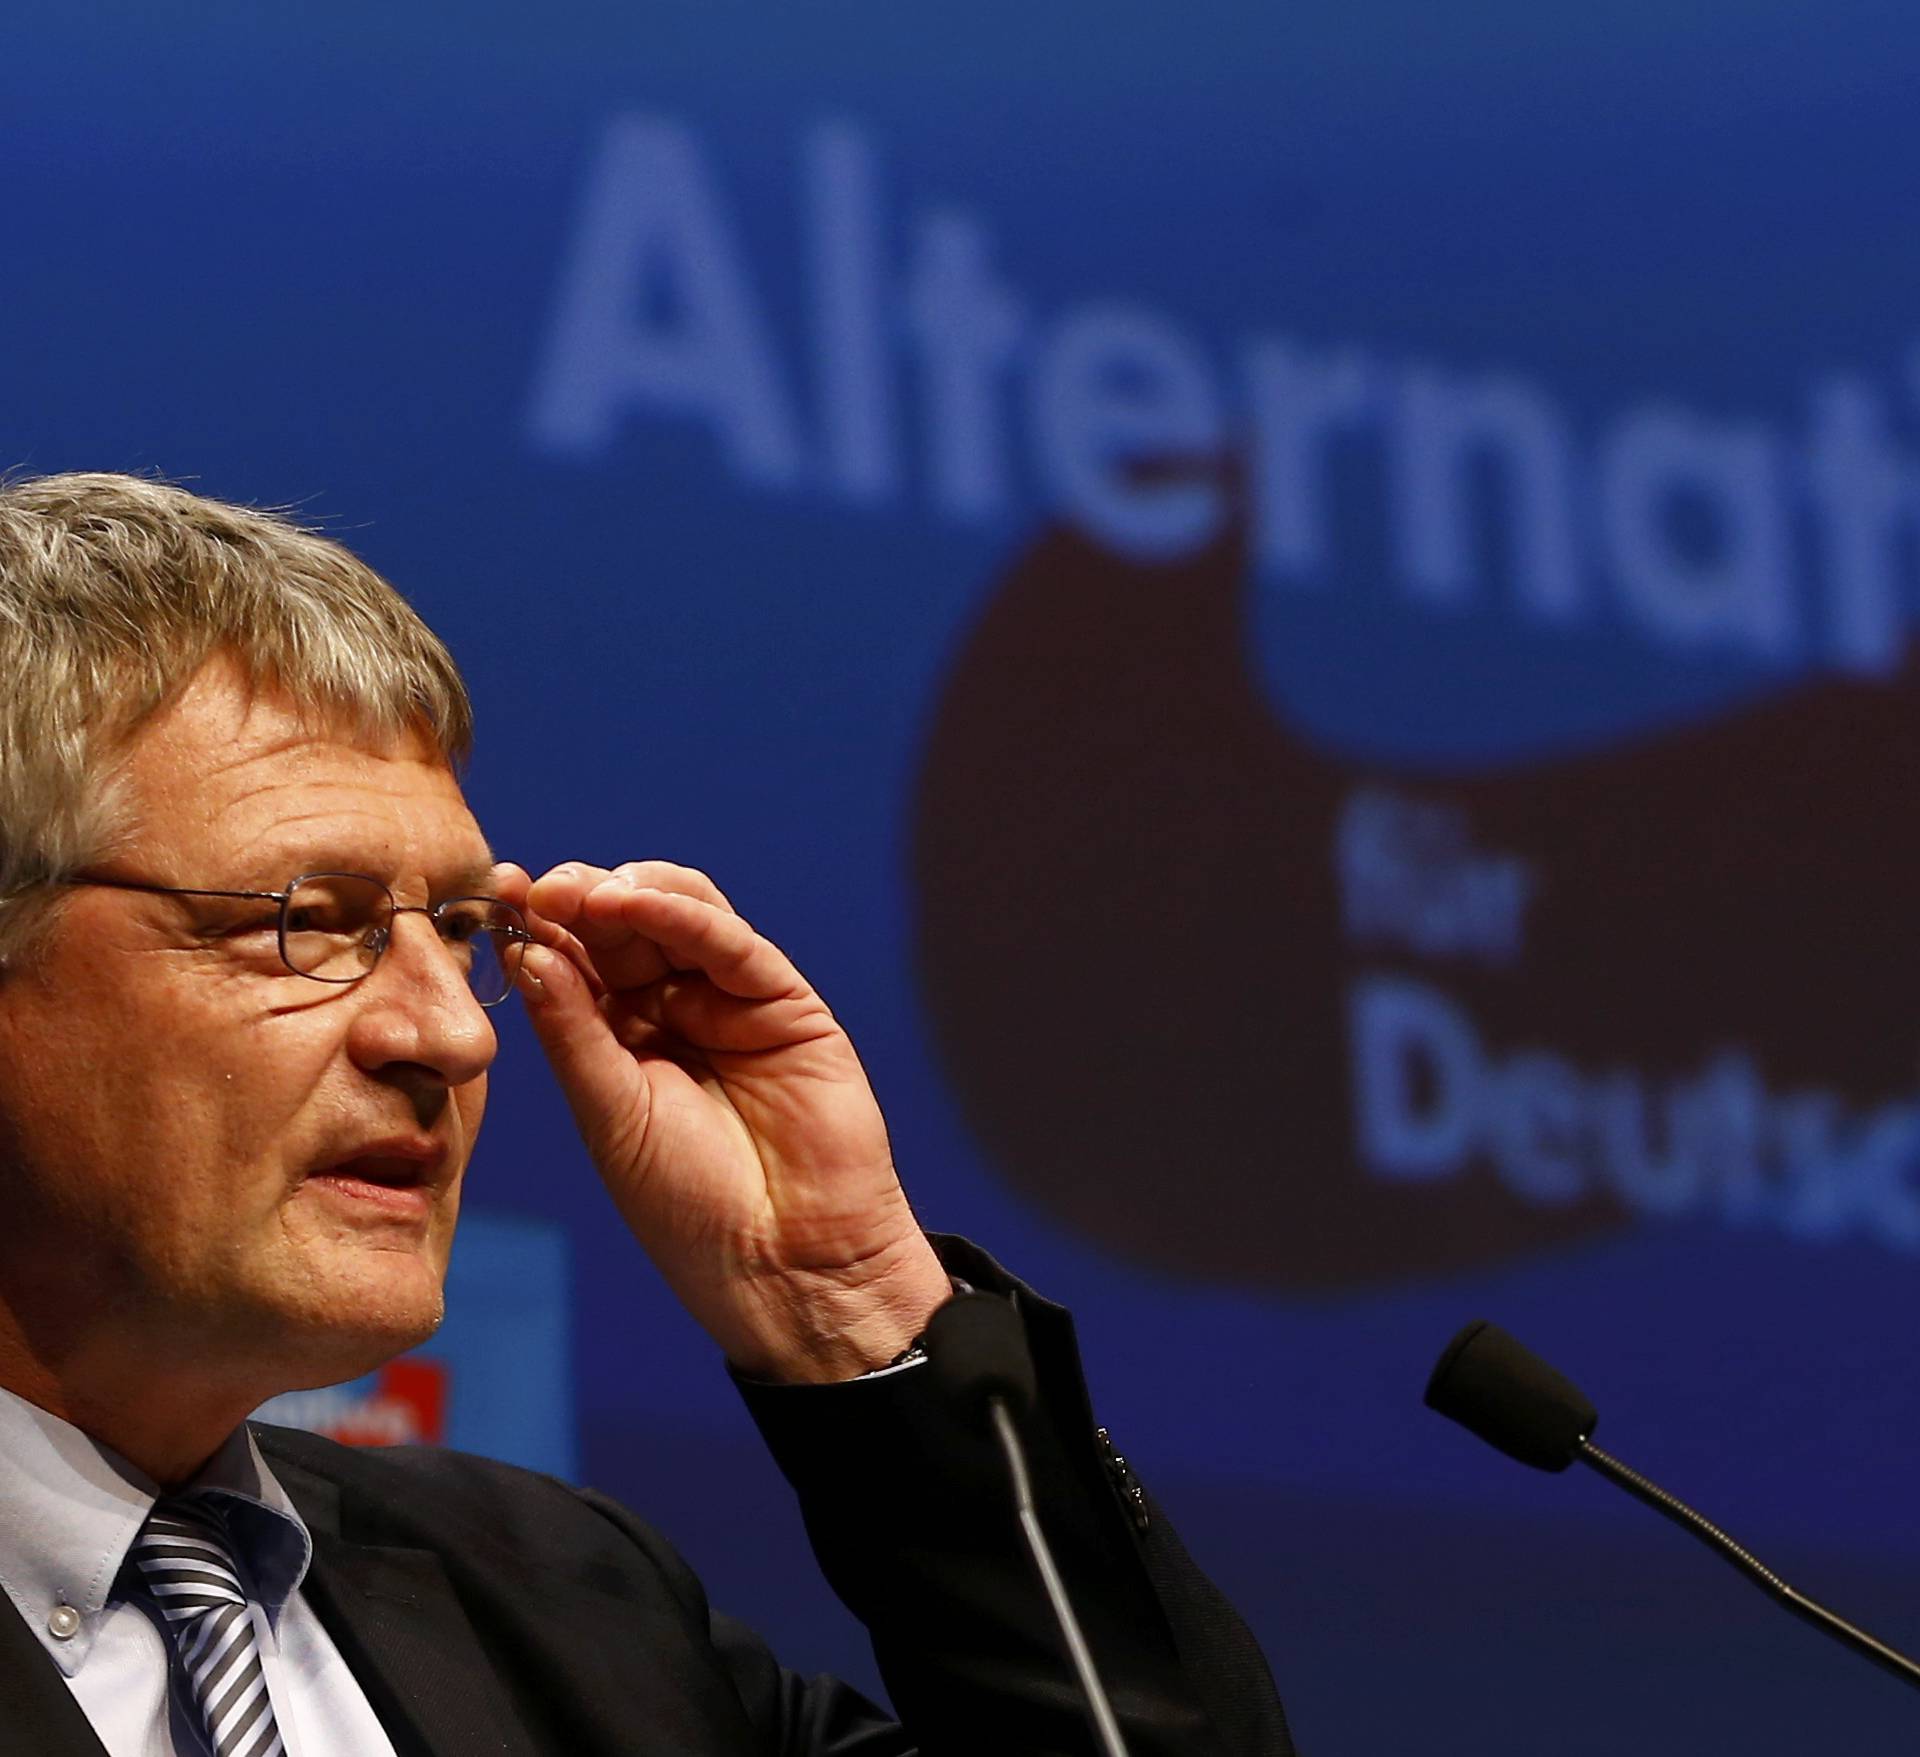 Meuthen, candidate in Baden-Wuerttemberg of the anti-immigration party Alternative for Germany (AfD) speaks at the AfD congress in Stuttgart